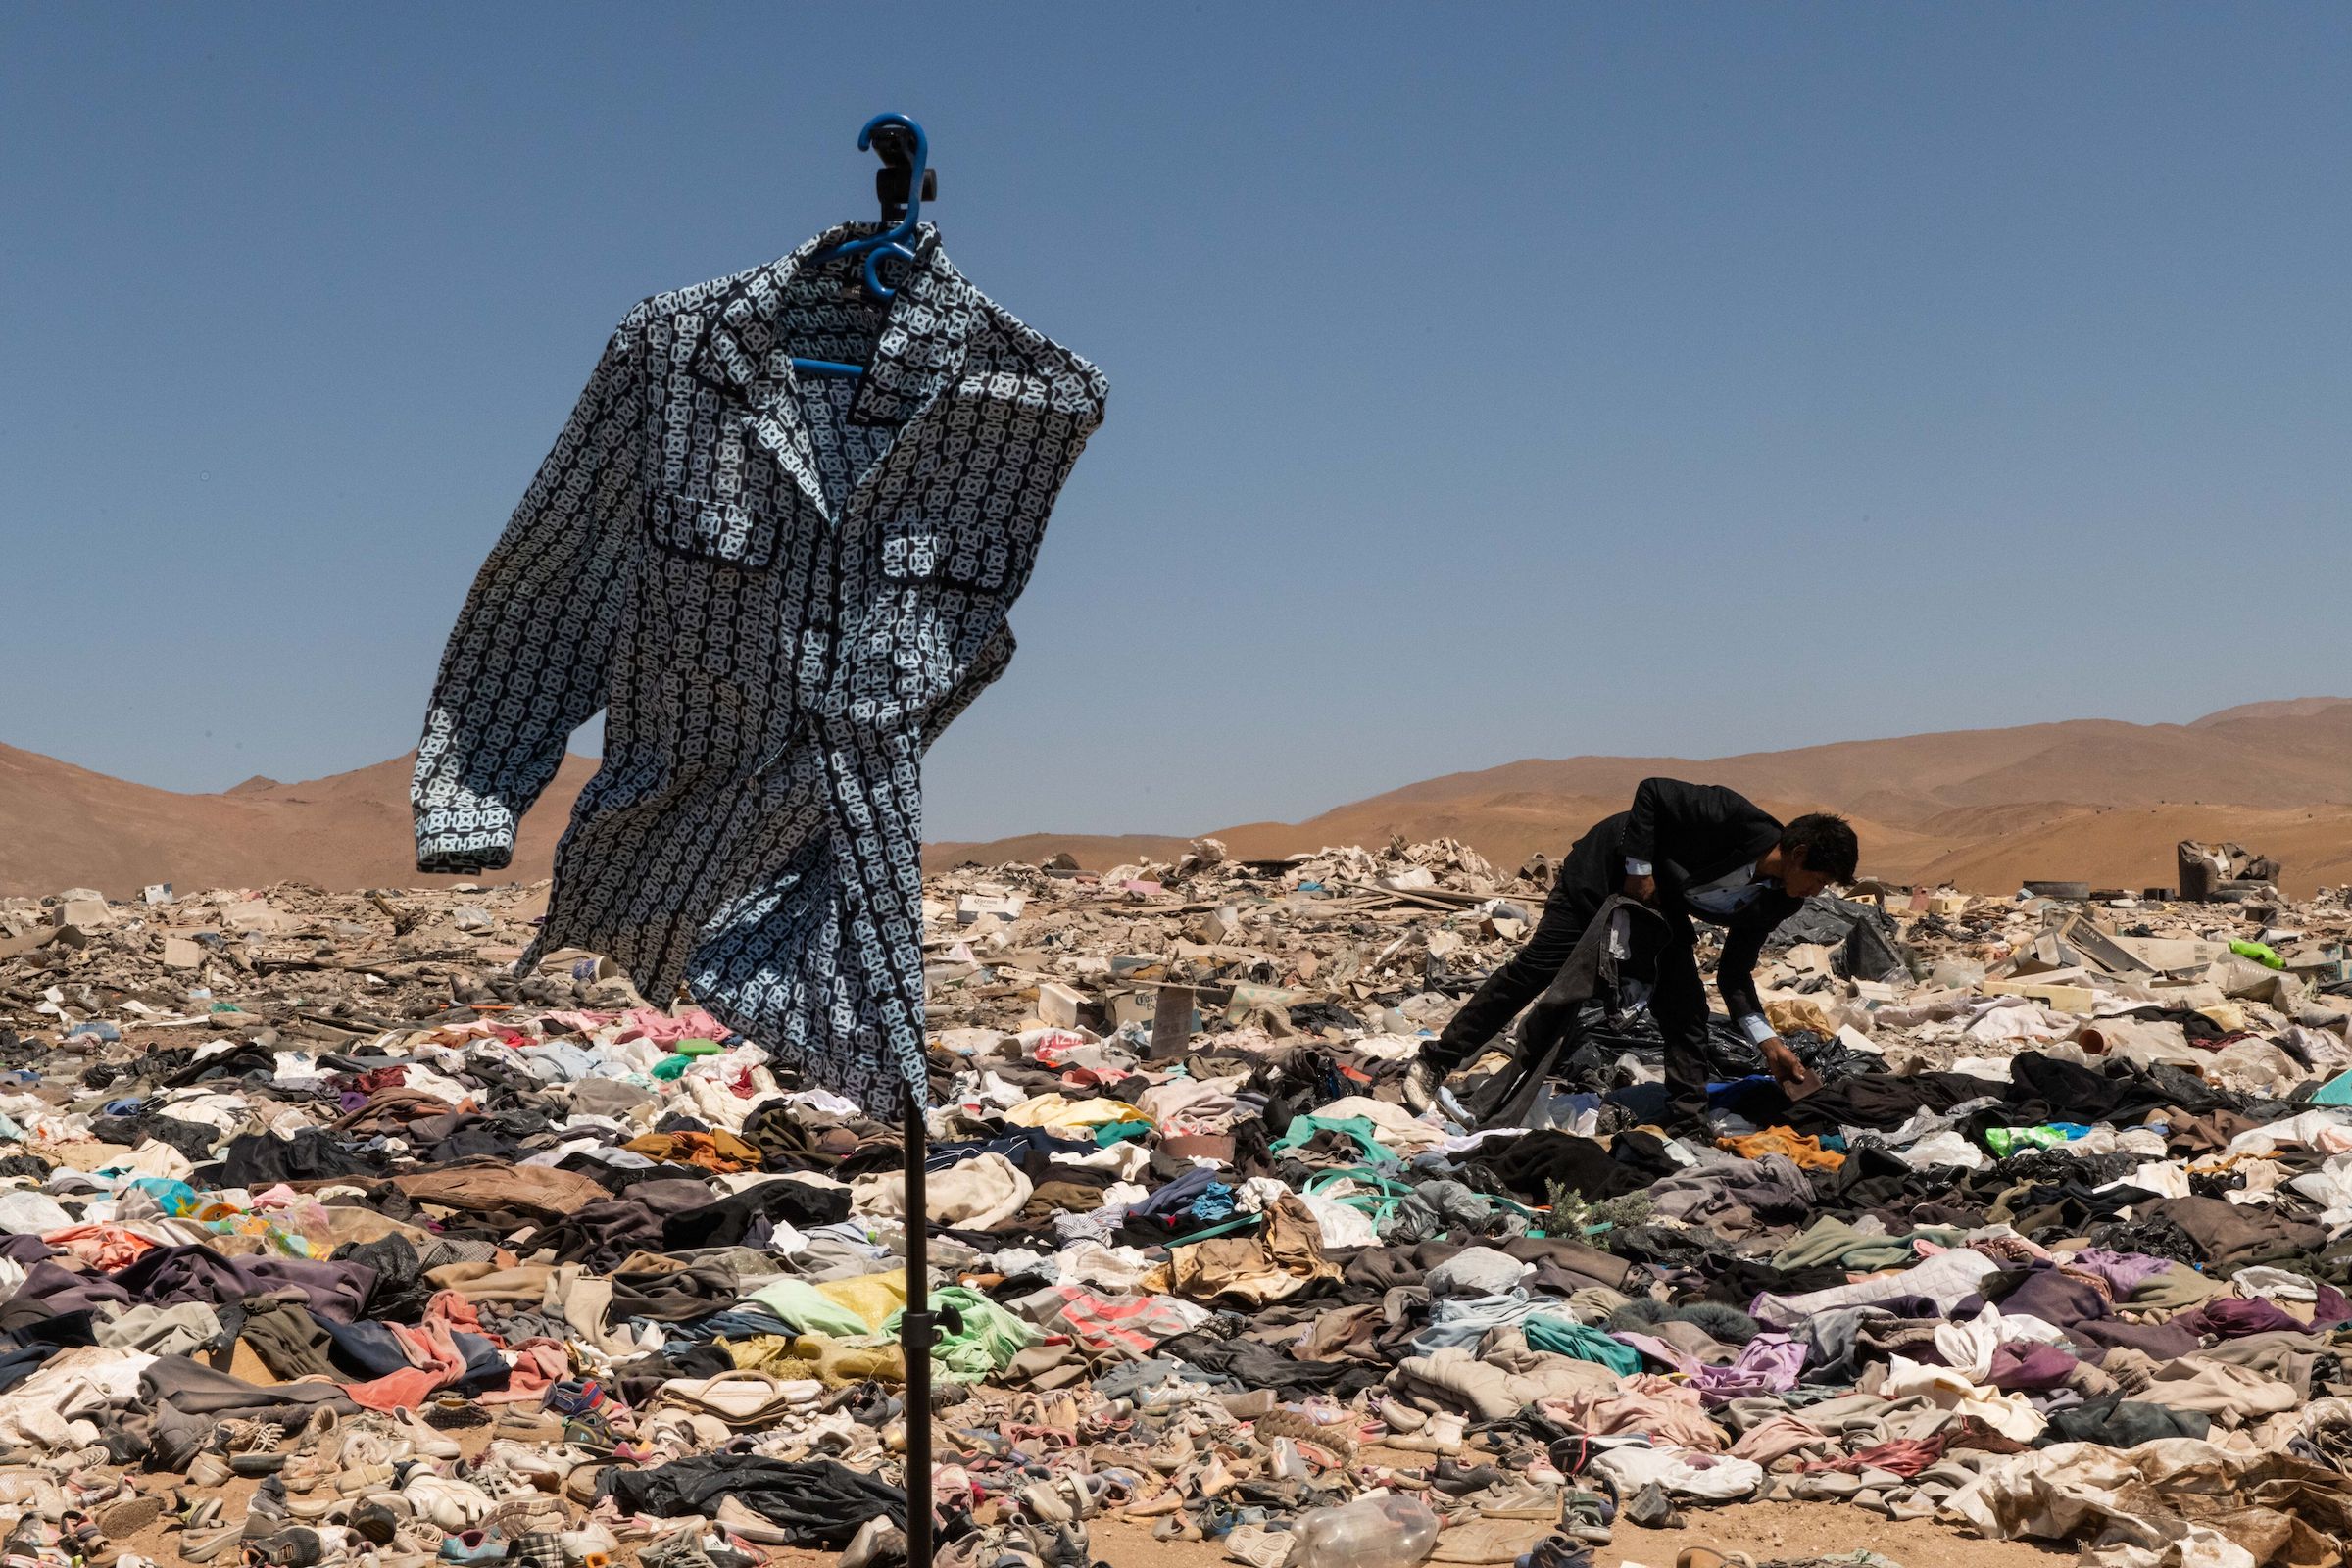 Millions of pieces of clothing lying in the middle of the desert are burned and turned into ash.